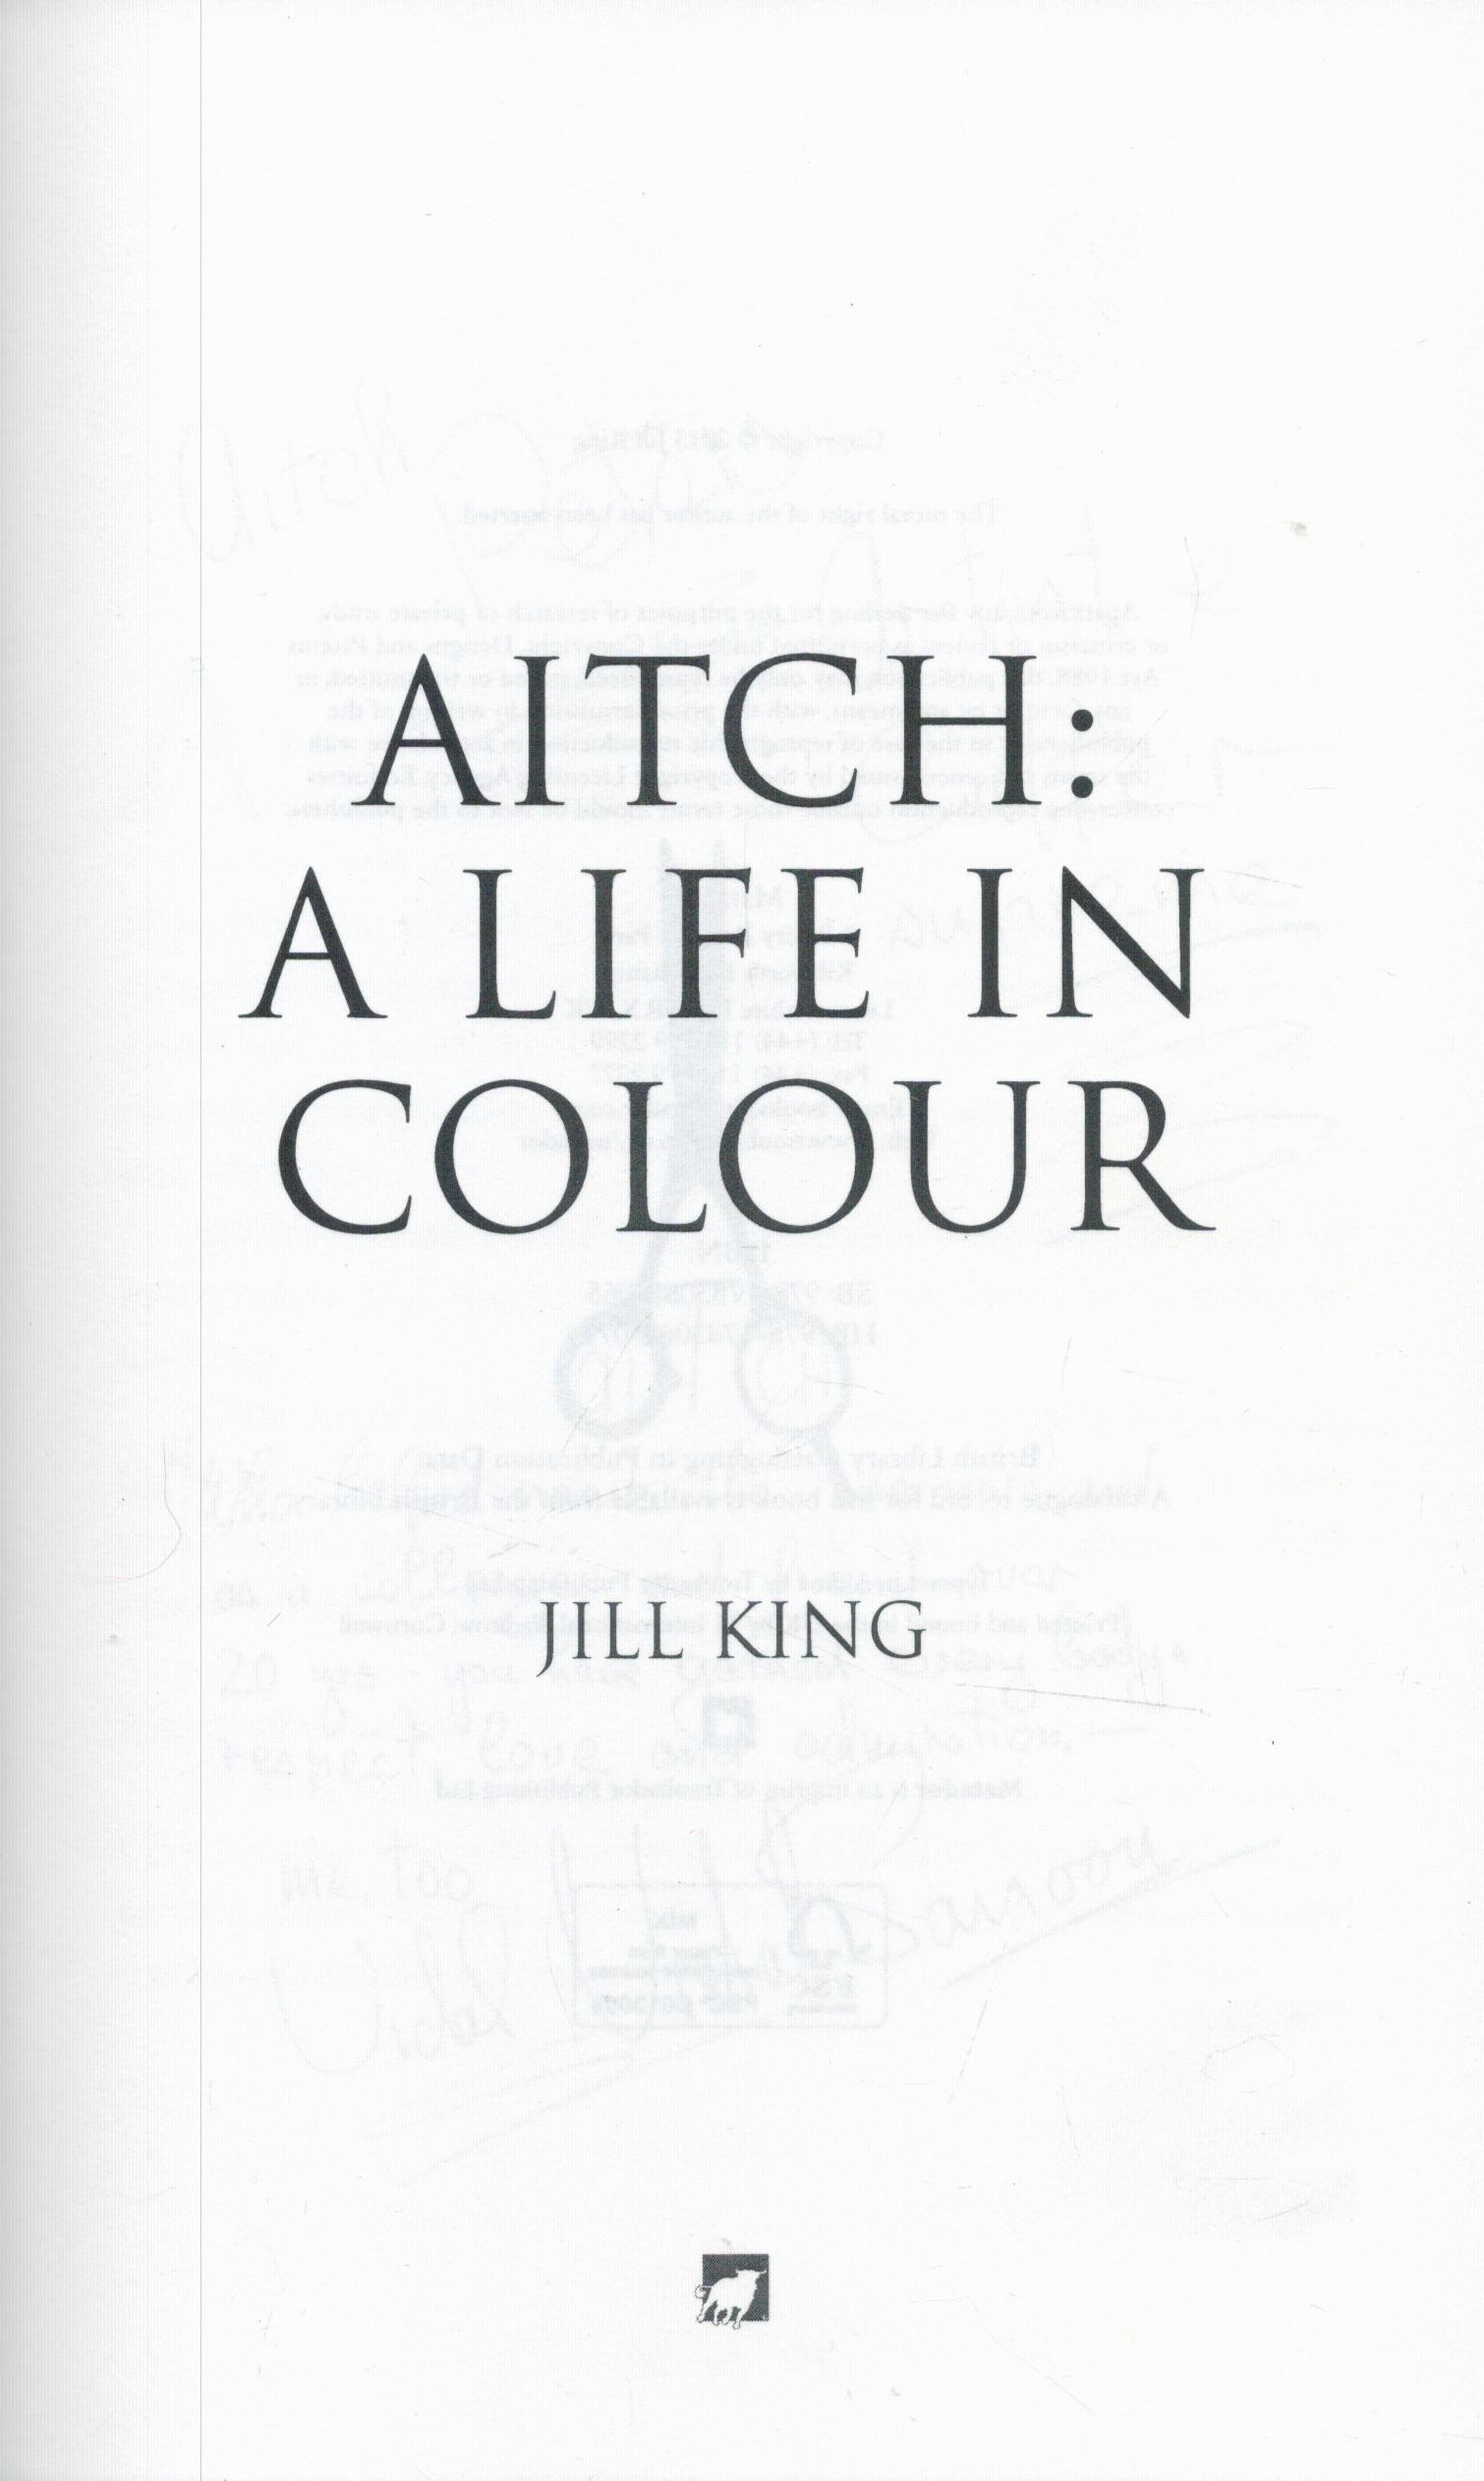 Aitch A Life In Colour by Jill King 2013 First Edition Hardback Book with 187 pages published by - Image 2 of 3